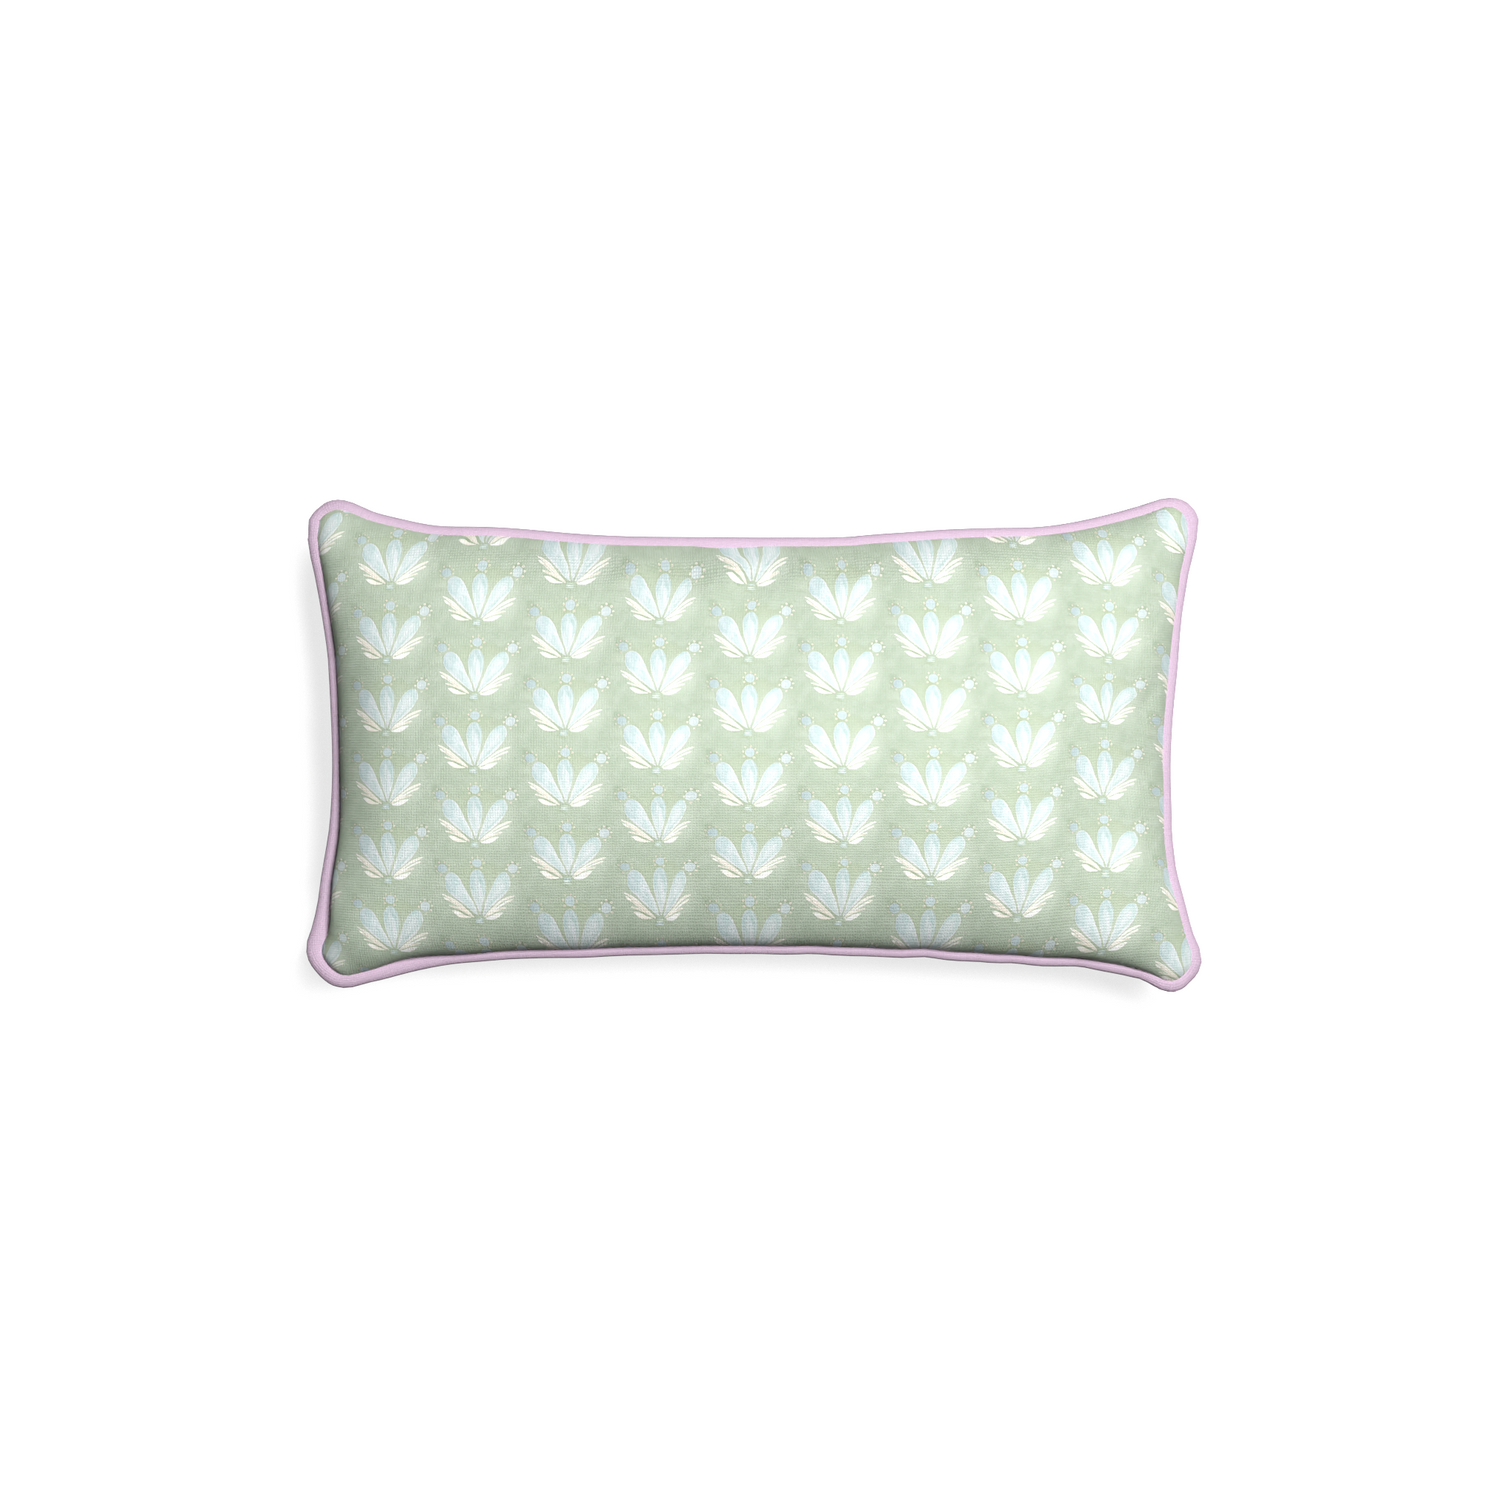 Petite-lumbar serena sea salt custom blue & green floral drop repeatpillow with l piping on white background